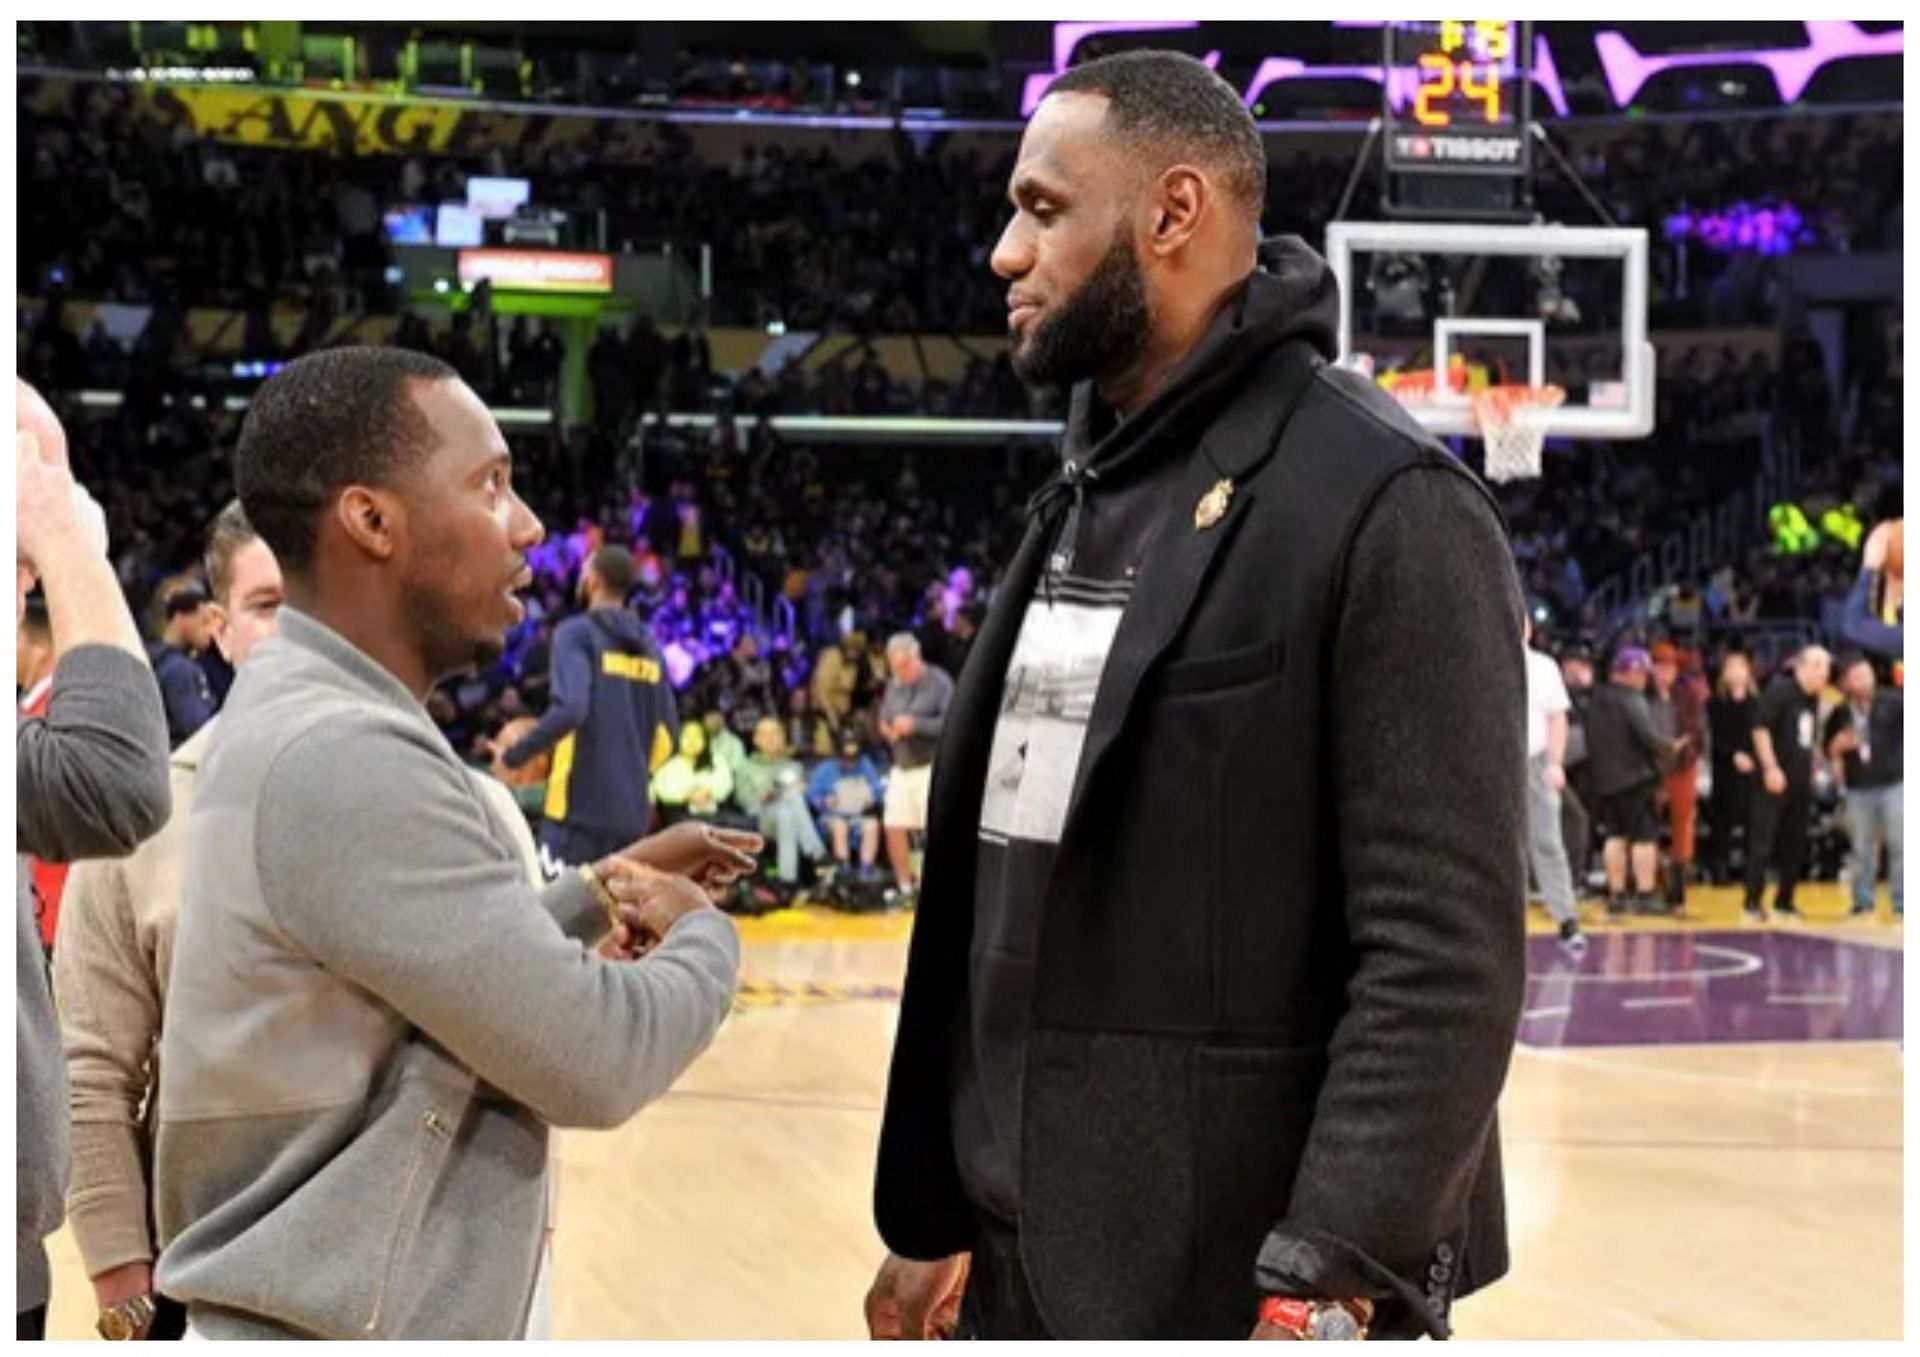 Rich Paul and LeBron James during a Lakers game back in Los Angeles in 2019 (Photo credit: Allen Berezovsky/Getty Images)